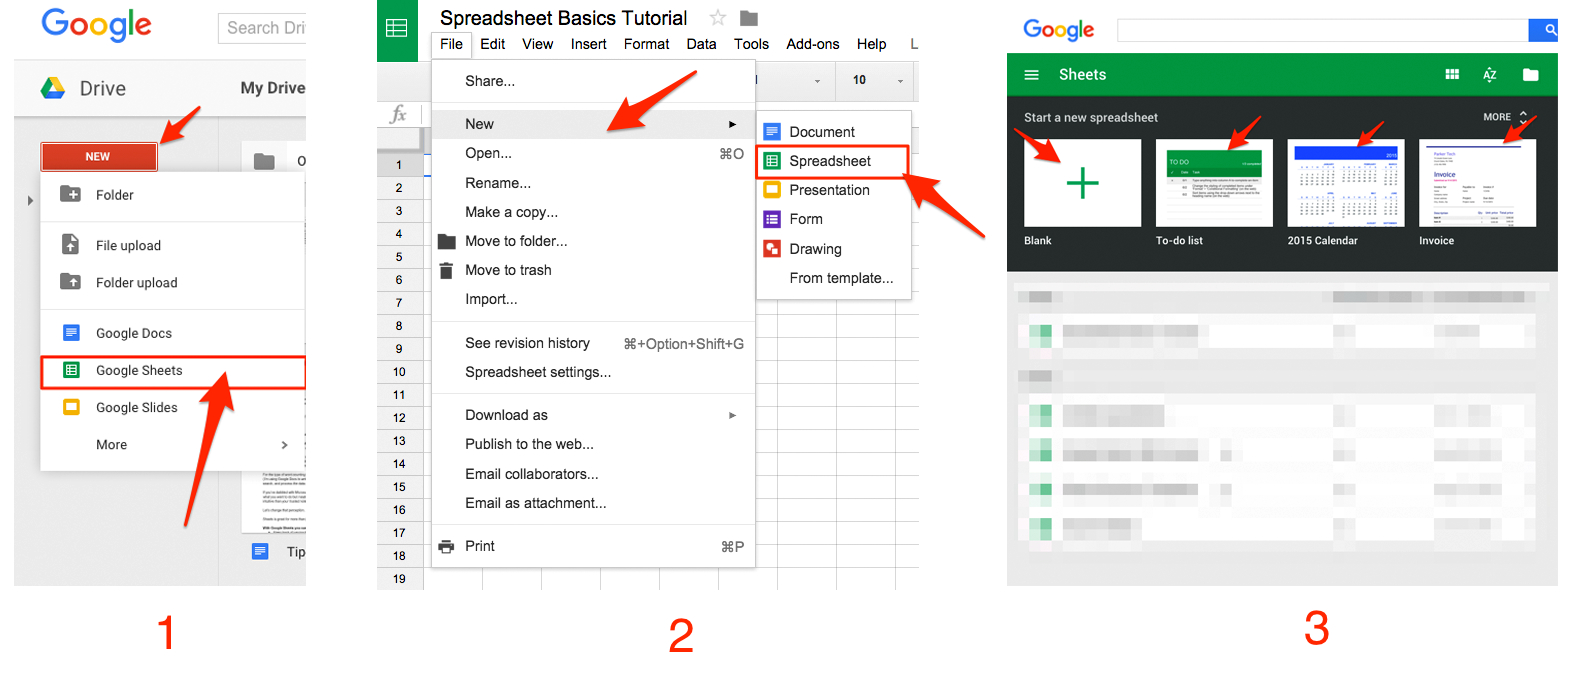 How To Create A Spreadsheet For Dummies In Google Sheets 101: The Beginner's Guide To Online Spreadsheets  The